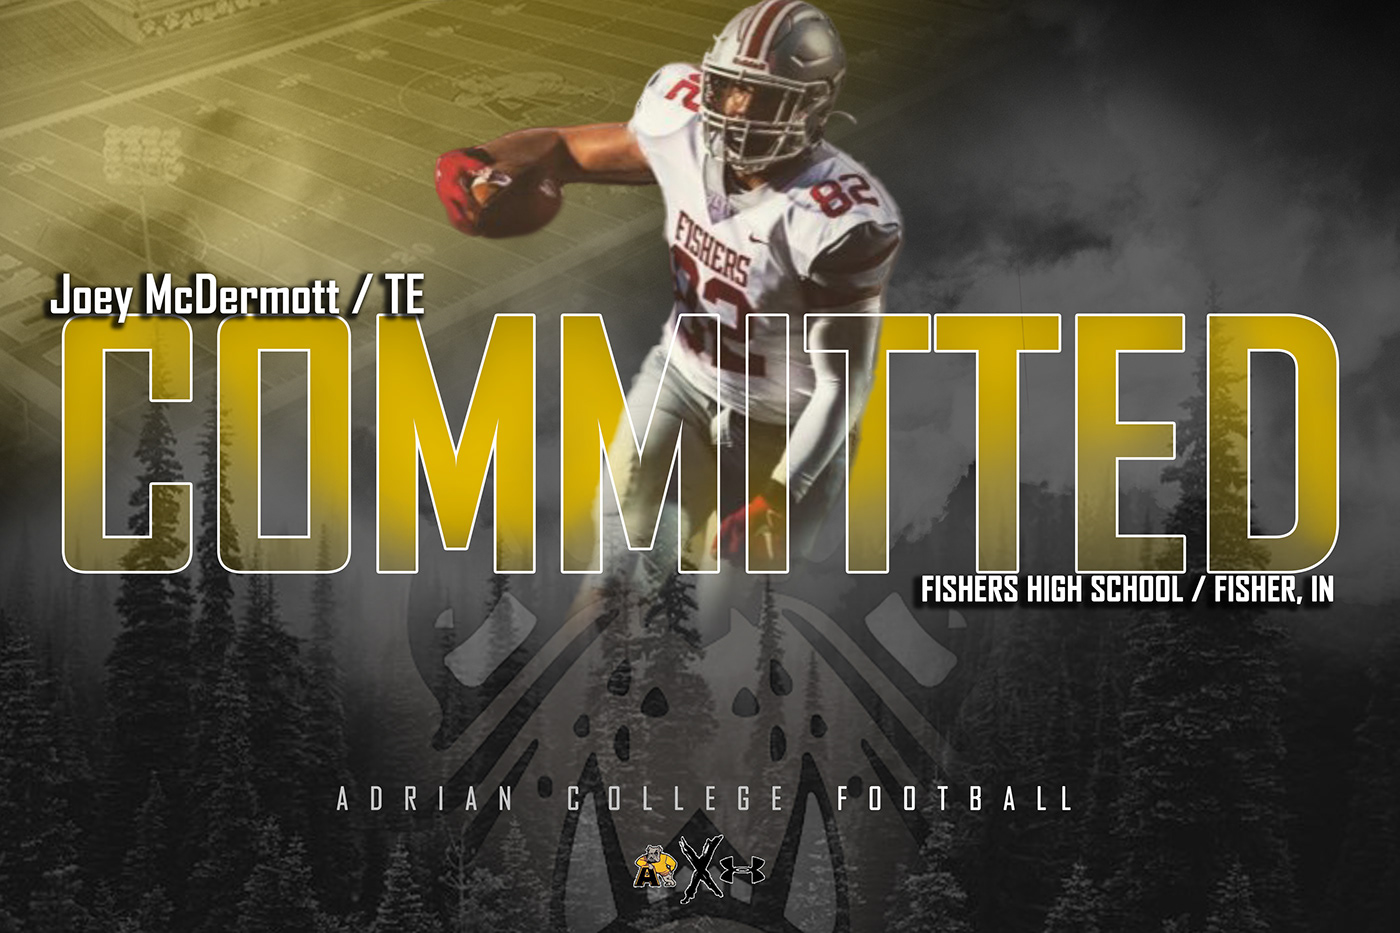 adrian college committed football